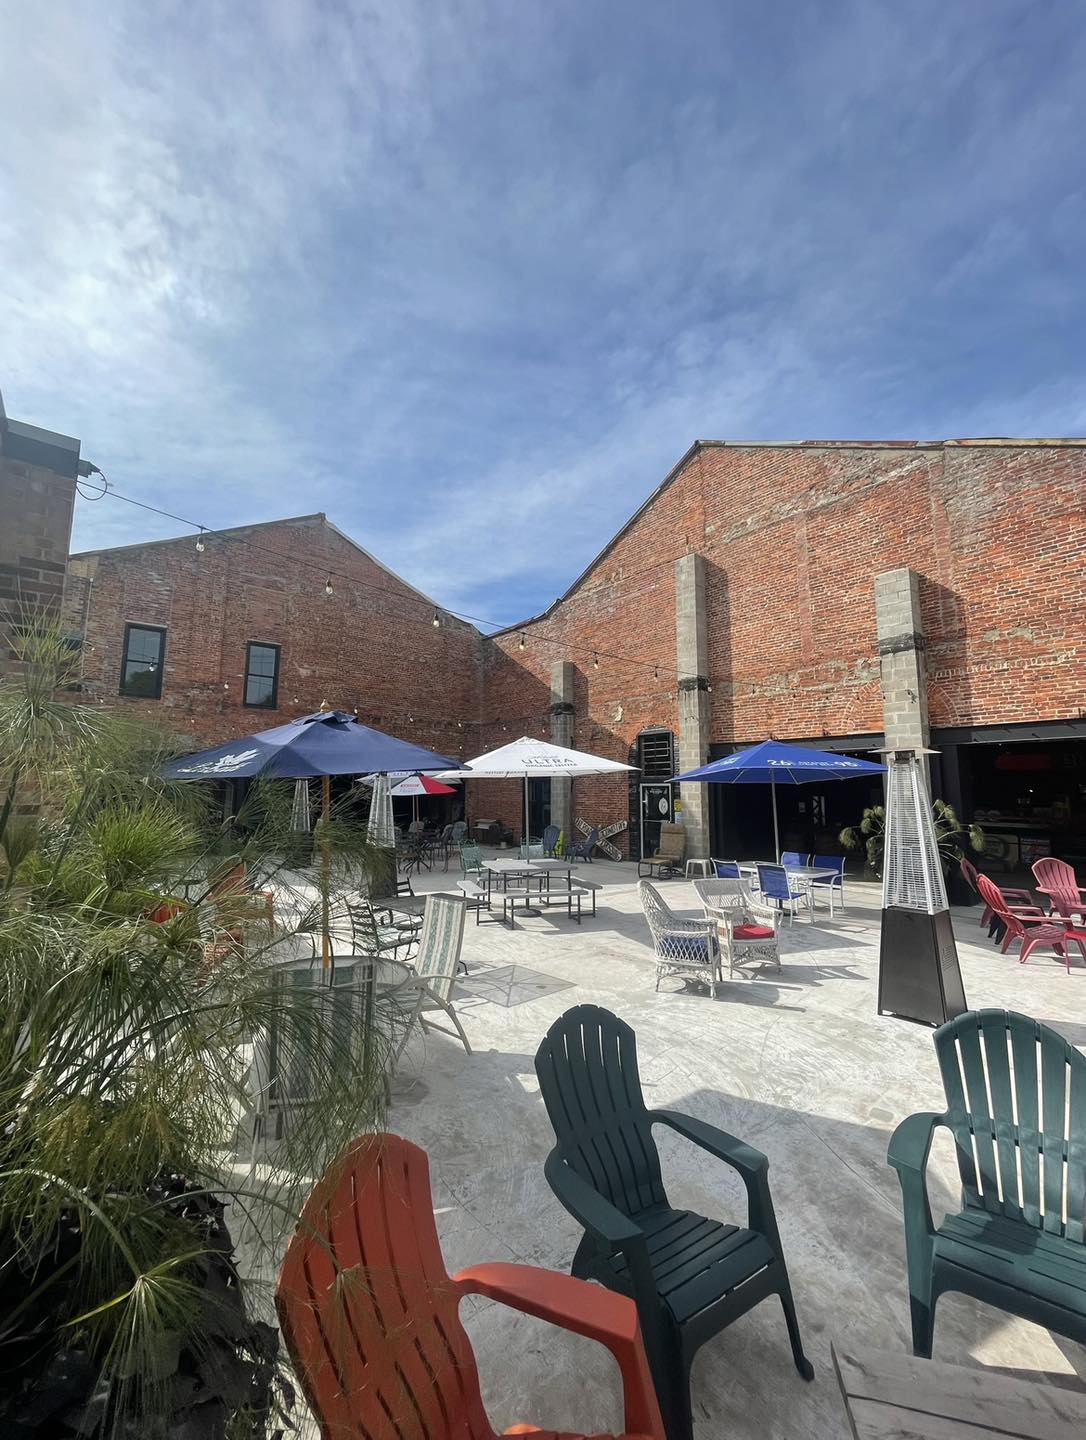 Concrete patio next to two large brick walls and filled with chairs and tables.